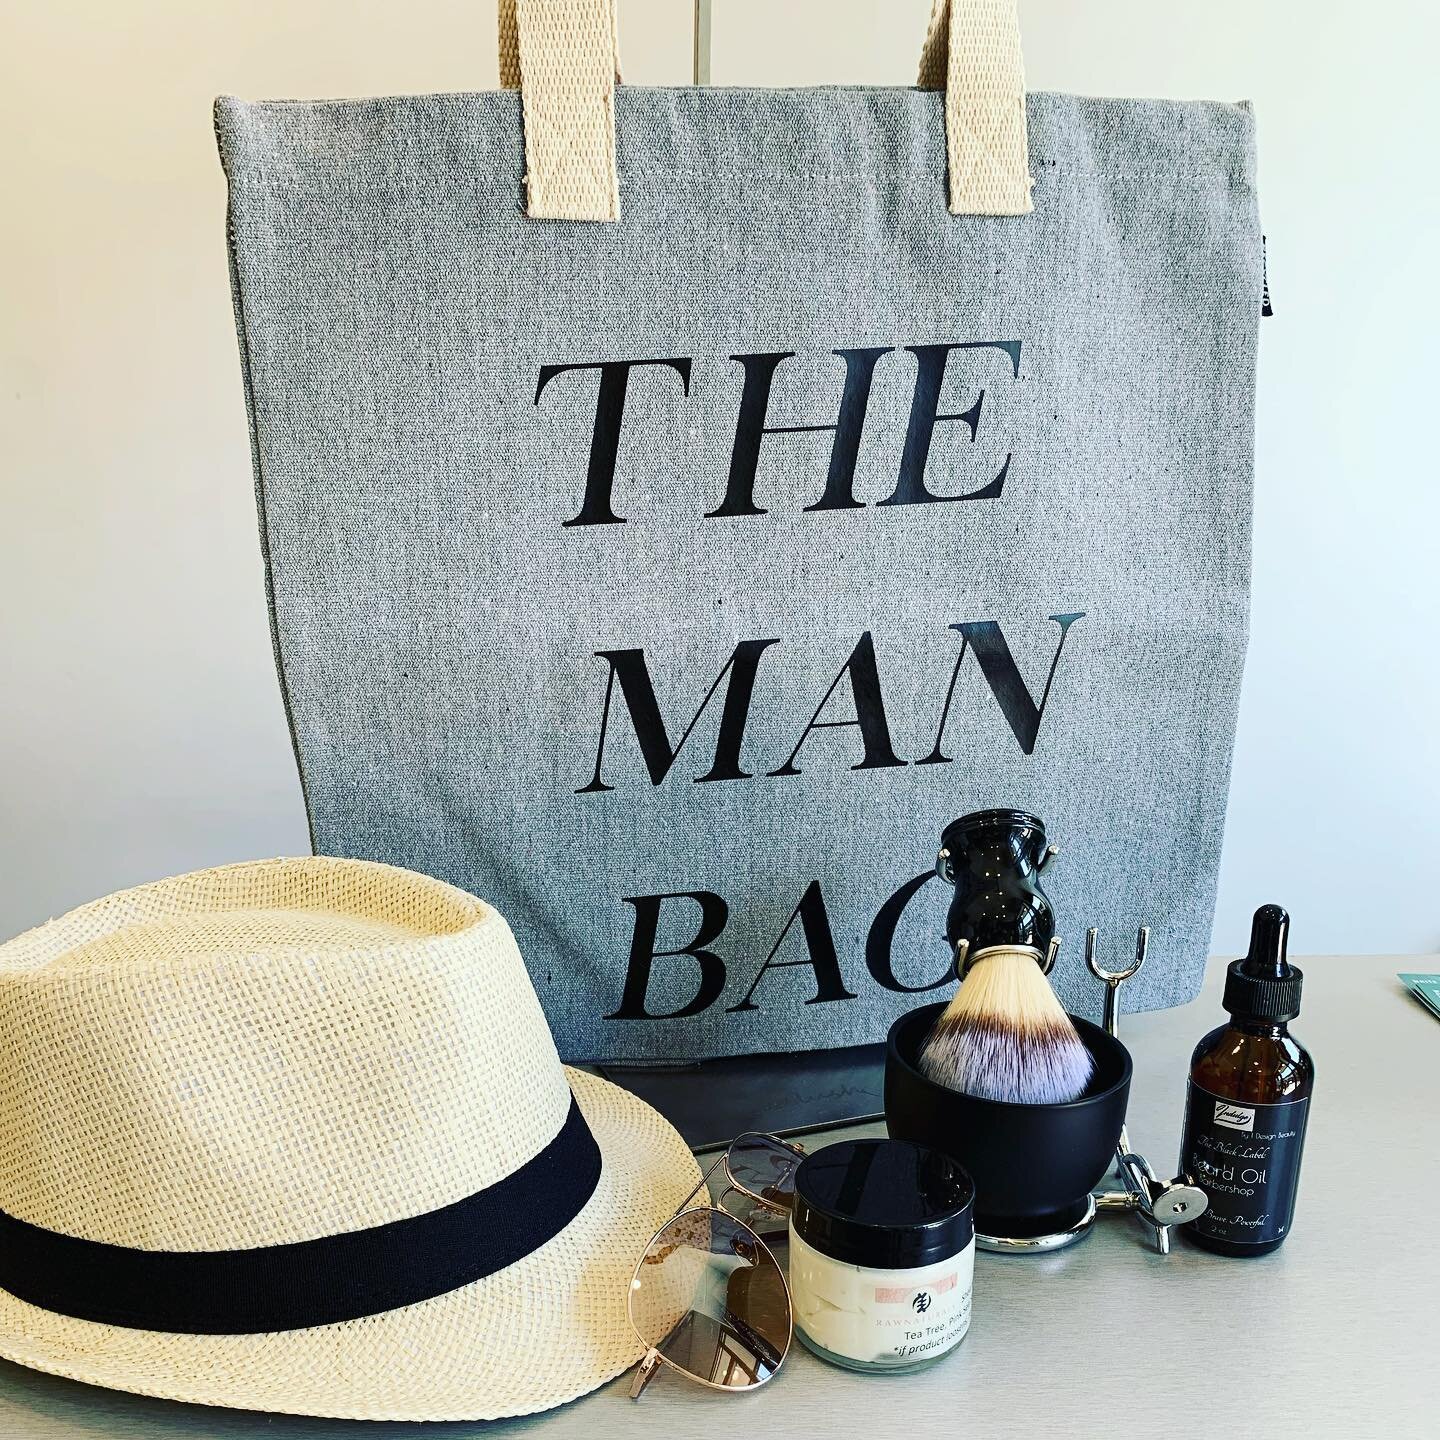 Hello Cool Dad! Ok we have some great last minute gift ideas for dad! Don&rsquo;t miss out! @popupwhiteplains 187 Martine Ave White Plains NY!! 11-5 Saturday 6/18
******************************************
#fathersday #giftideas #giftsets #beard #man